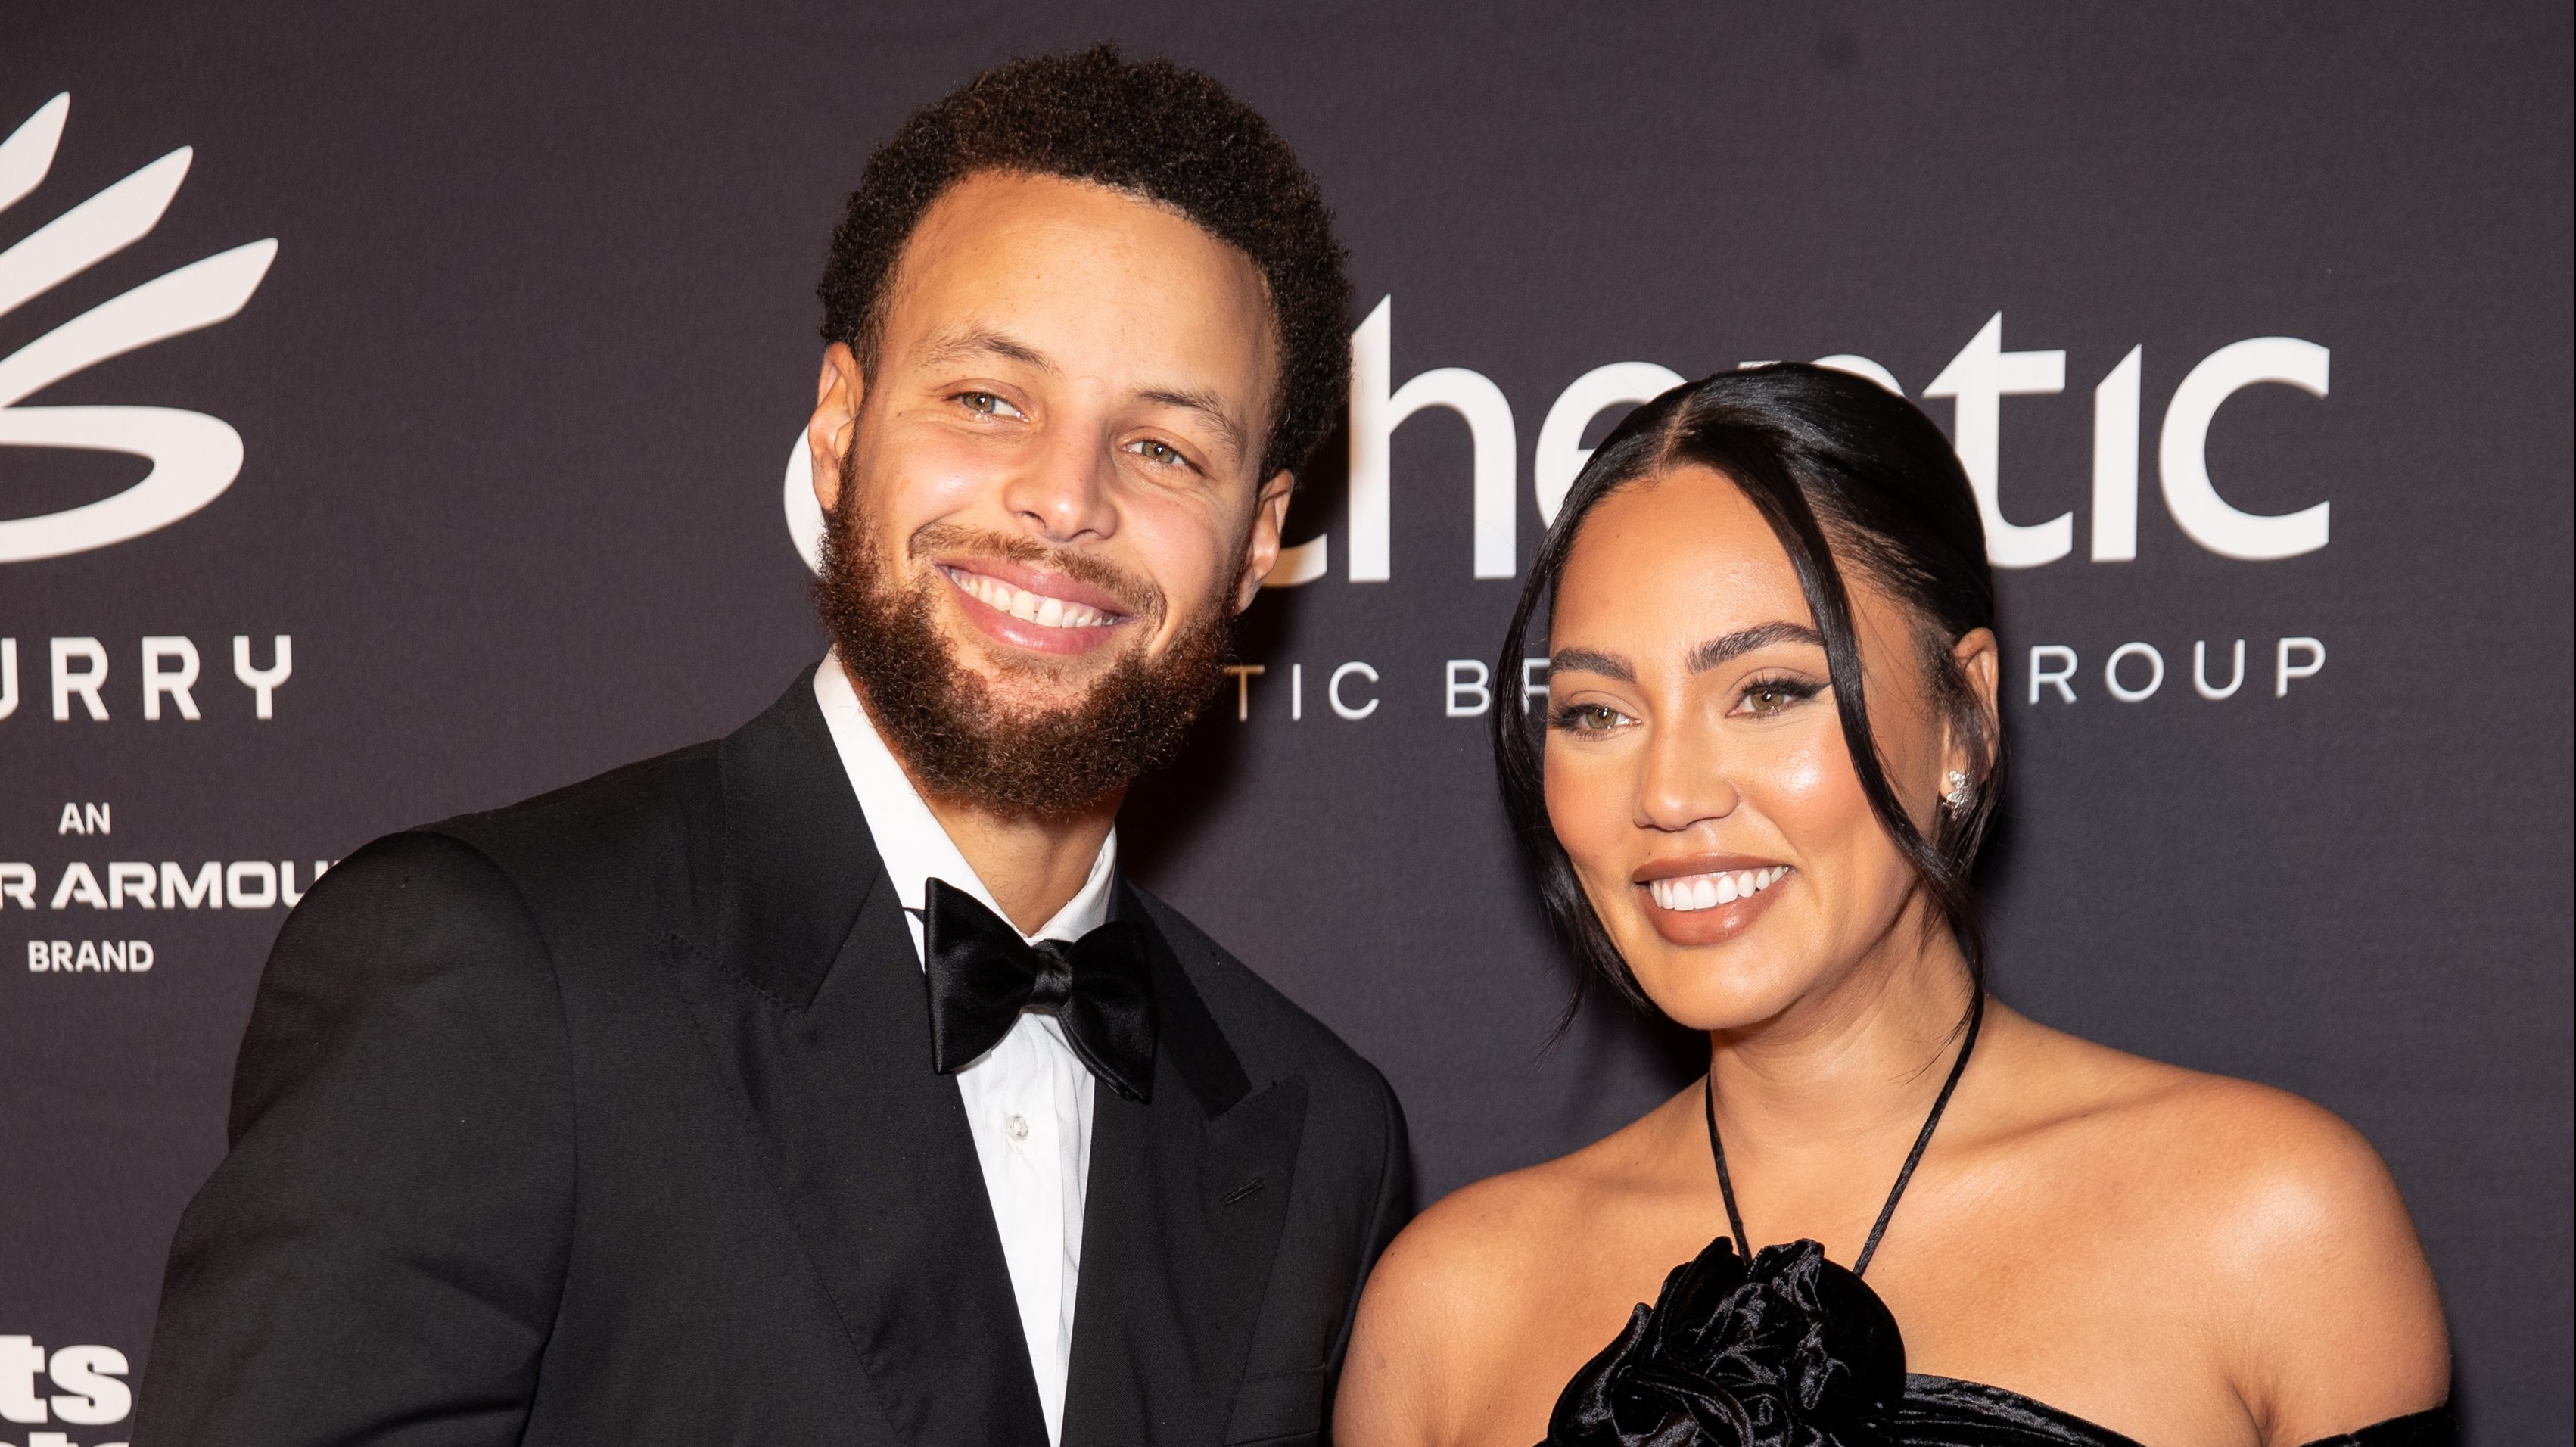 As His Wife, It's Kind of Annoying”: Ayesha Curry Unveils Her Pet